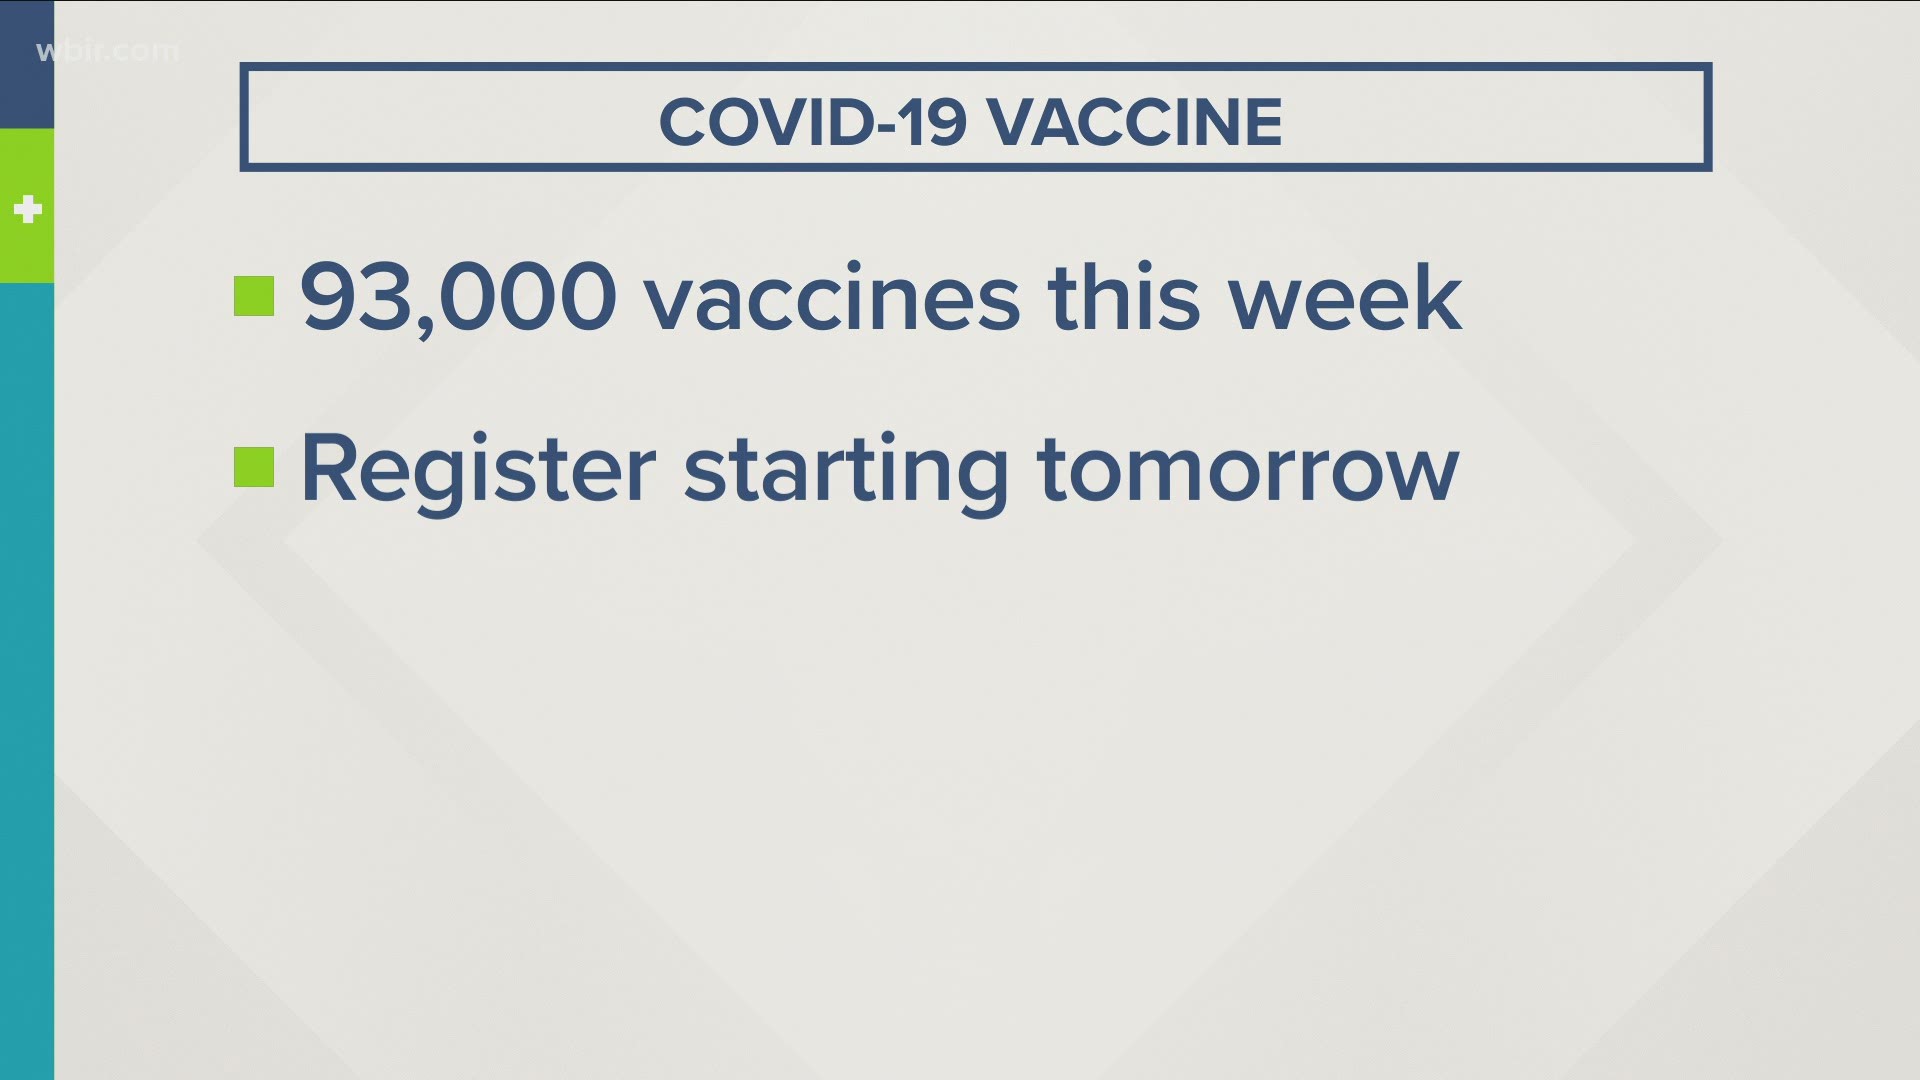 89 of Tennessee's 95 counties, which excludes Knox County and the other major metro areas, will now be vaccinating people 70 and up.